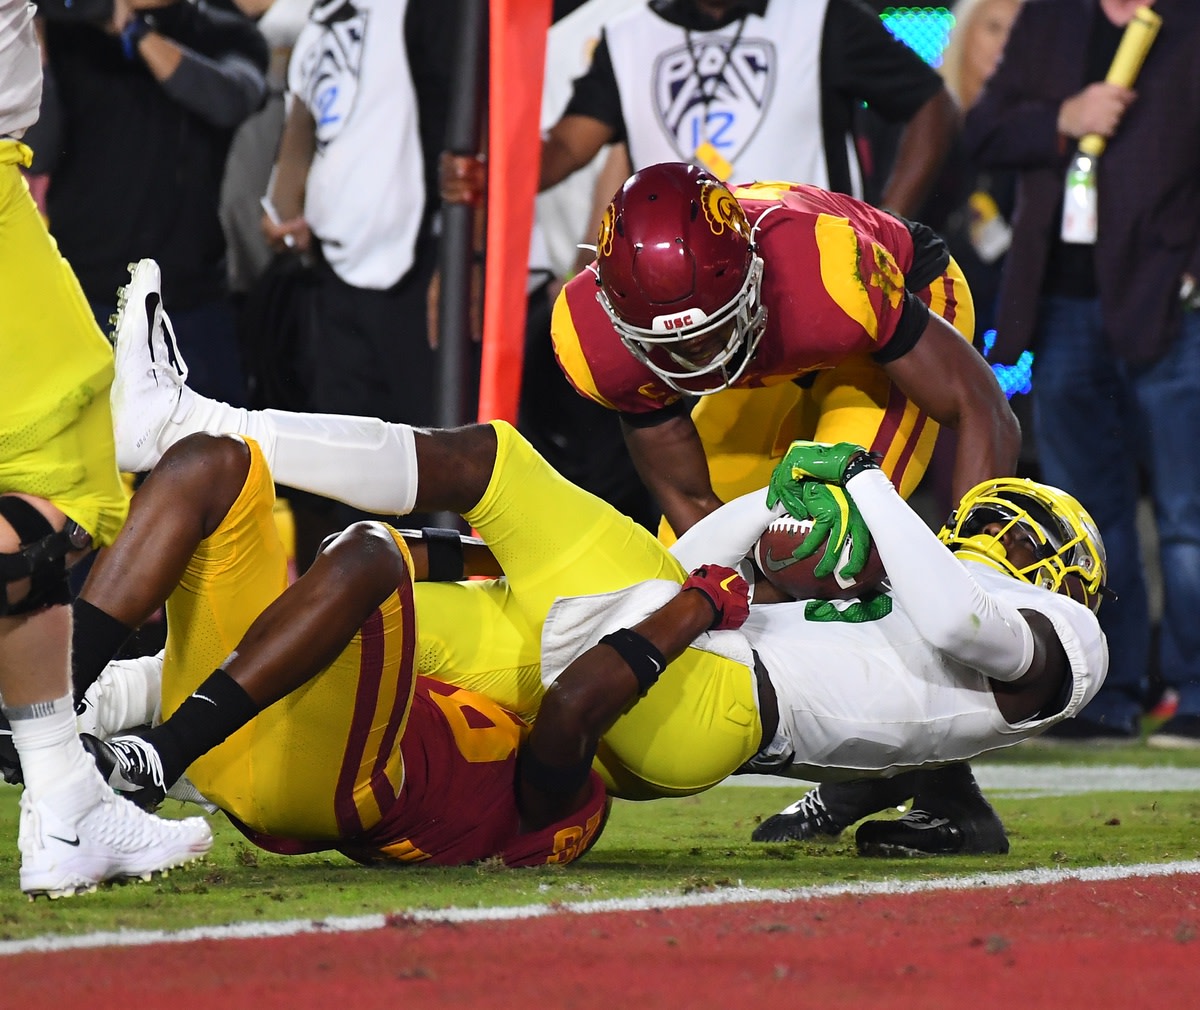 Nov 2, 2019; Los Angeles, CA, USA; Oregon Ducks wide receiver Juwan Johnson (6) runs the ball before he is stoped at the 1 yard line by USC Trojans safety C.J. Pollard (28) in the first half of the game at the Los Angeles Memorial Coliseum.